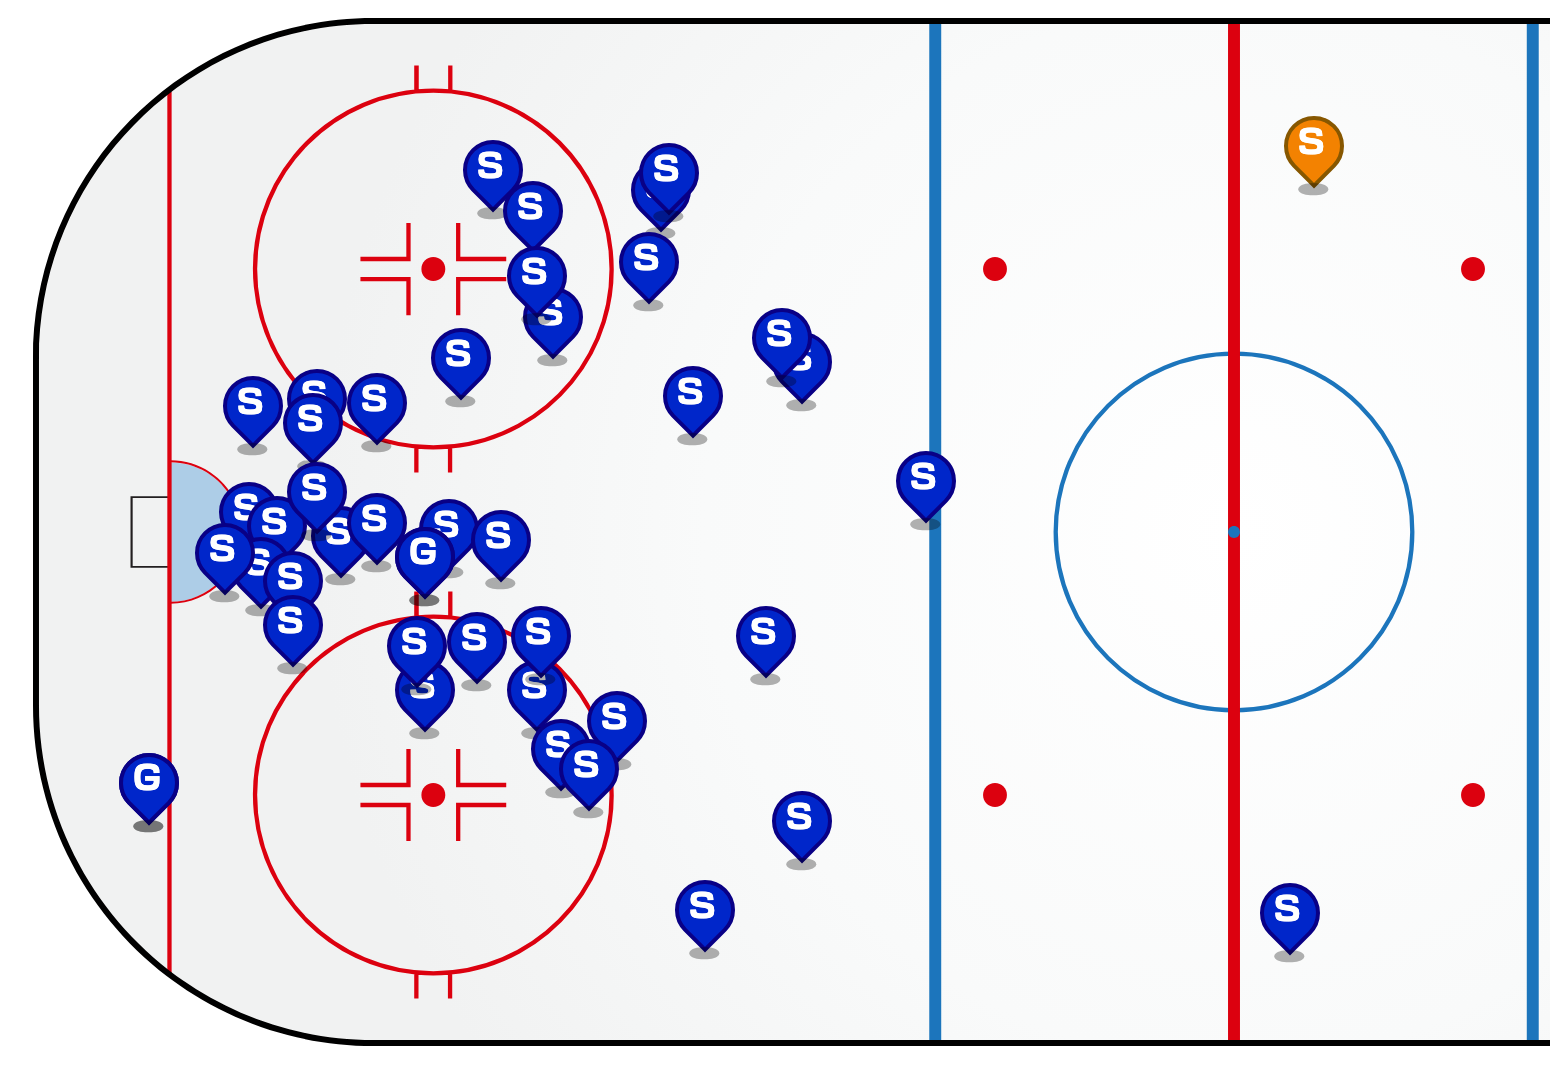 A graphic of an ice rink, showing one full end zone and the neutral zone. There are 45 blue dots representing Boston shots, with many of them around the front of the net.